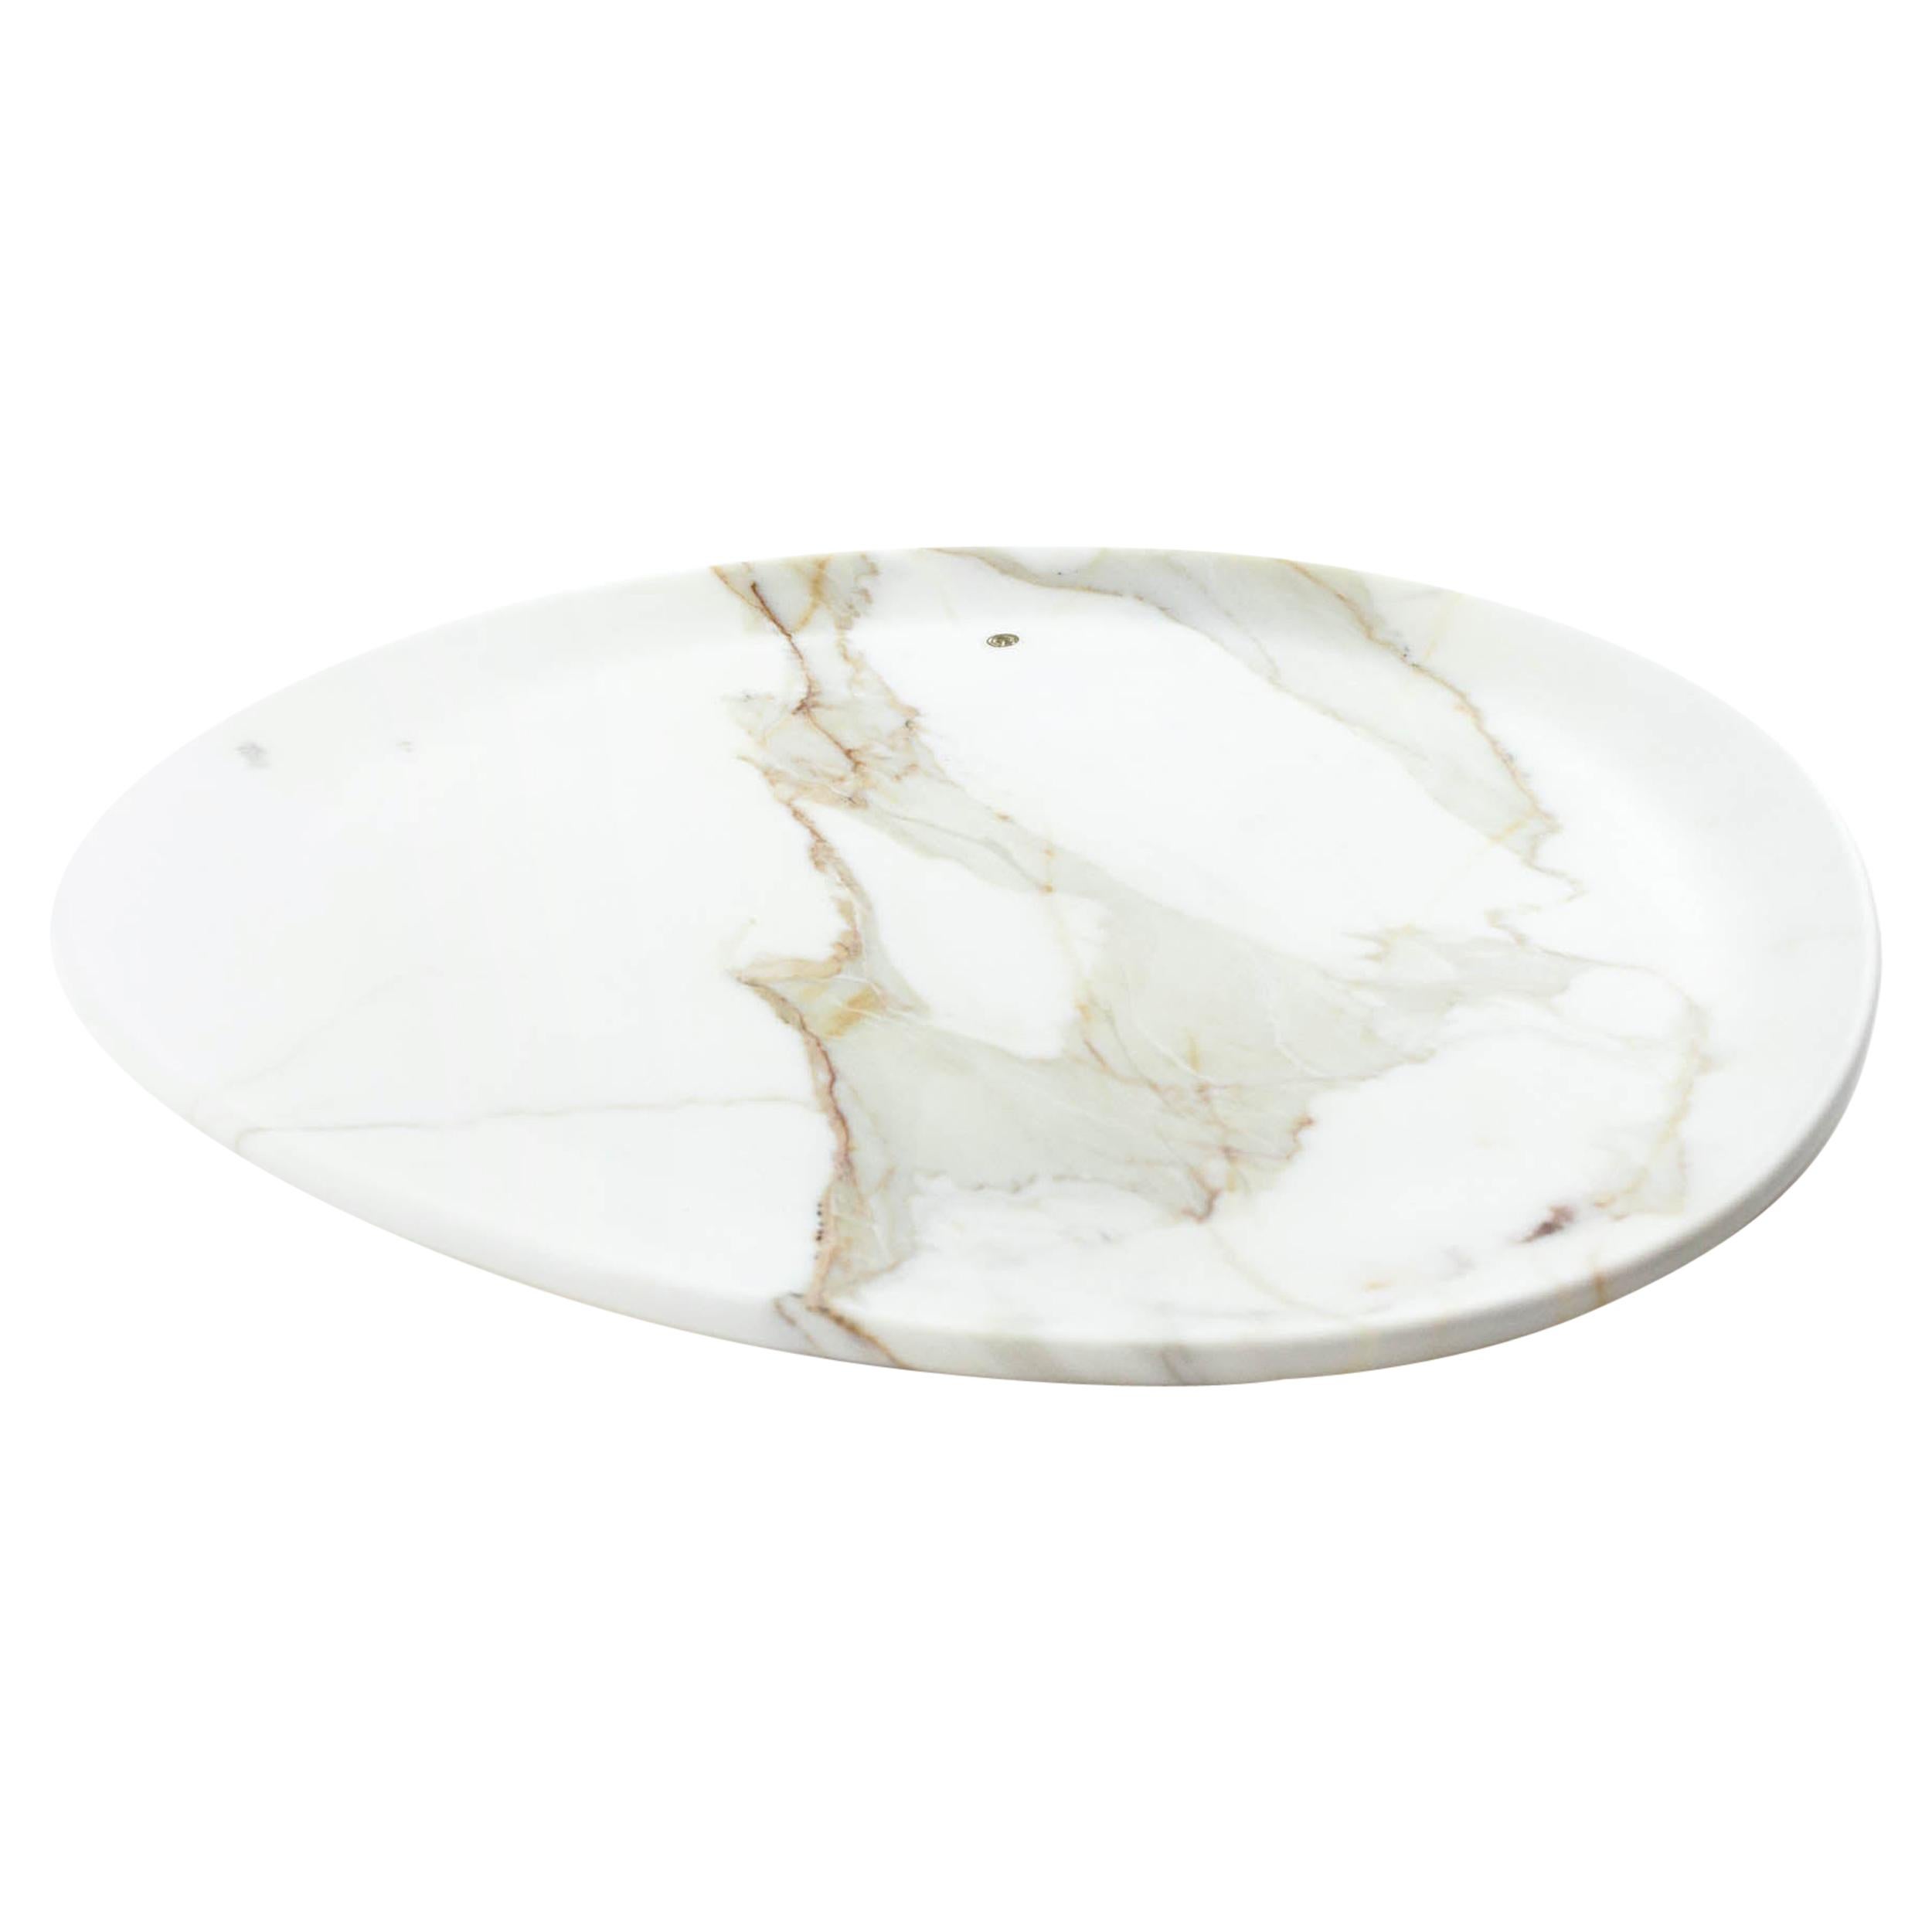 Plate Platter Serveware White Calacatta Marble Collectible Design Hand-carved